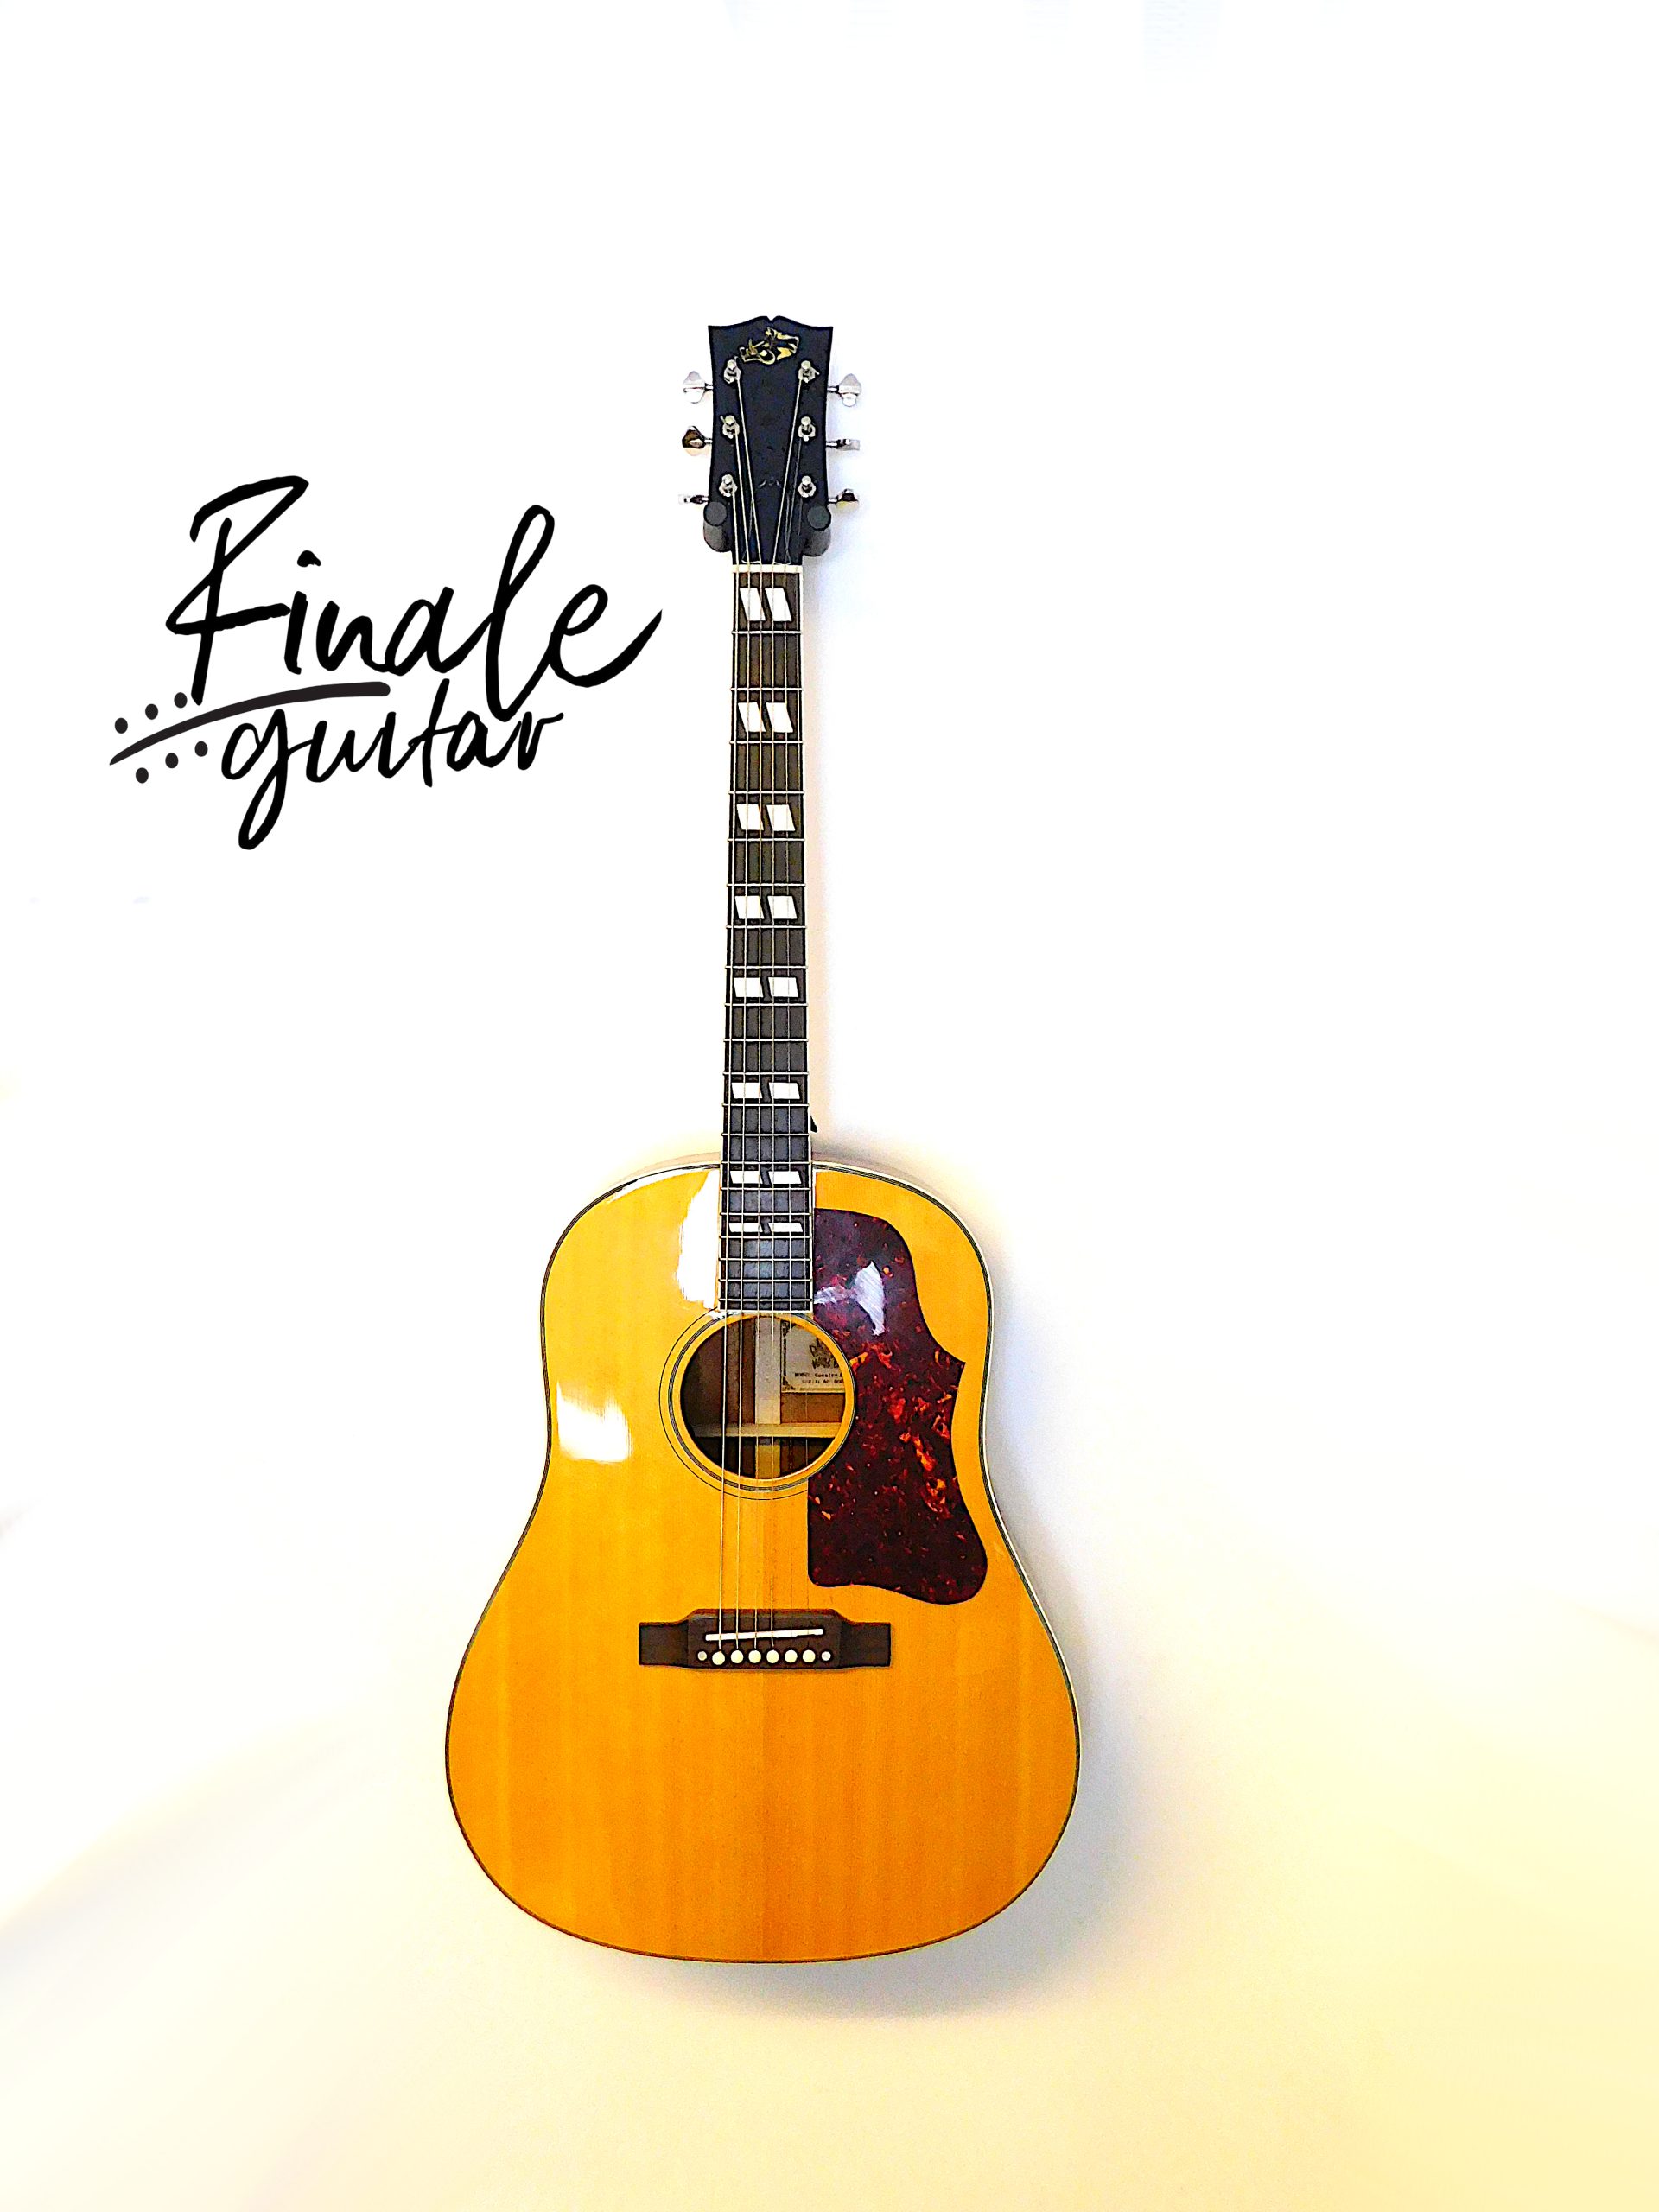 Wildboar Country and Western (J45 Clone) for sale in our Sheffield guitar shop, Finale Guitar